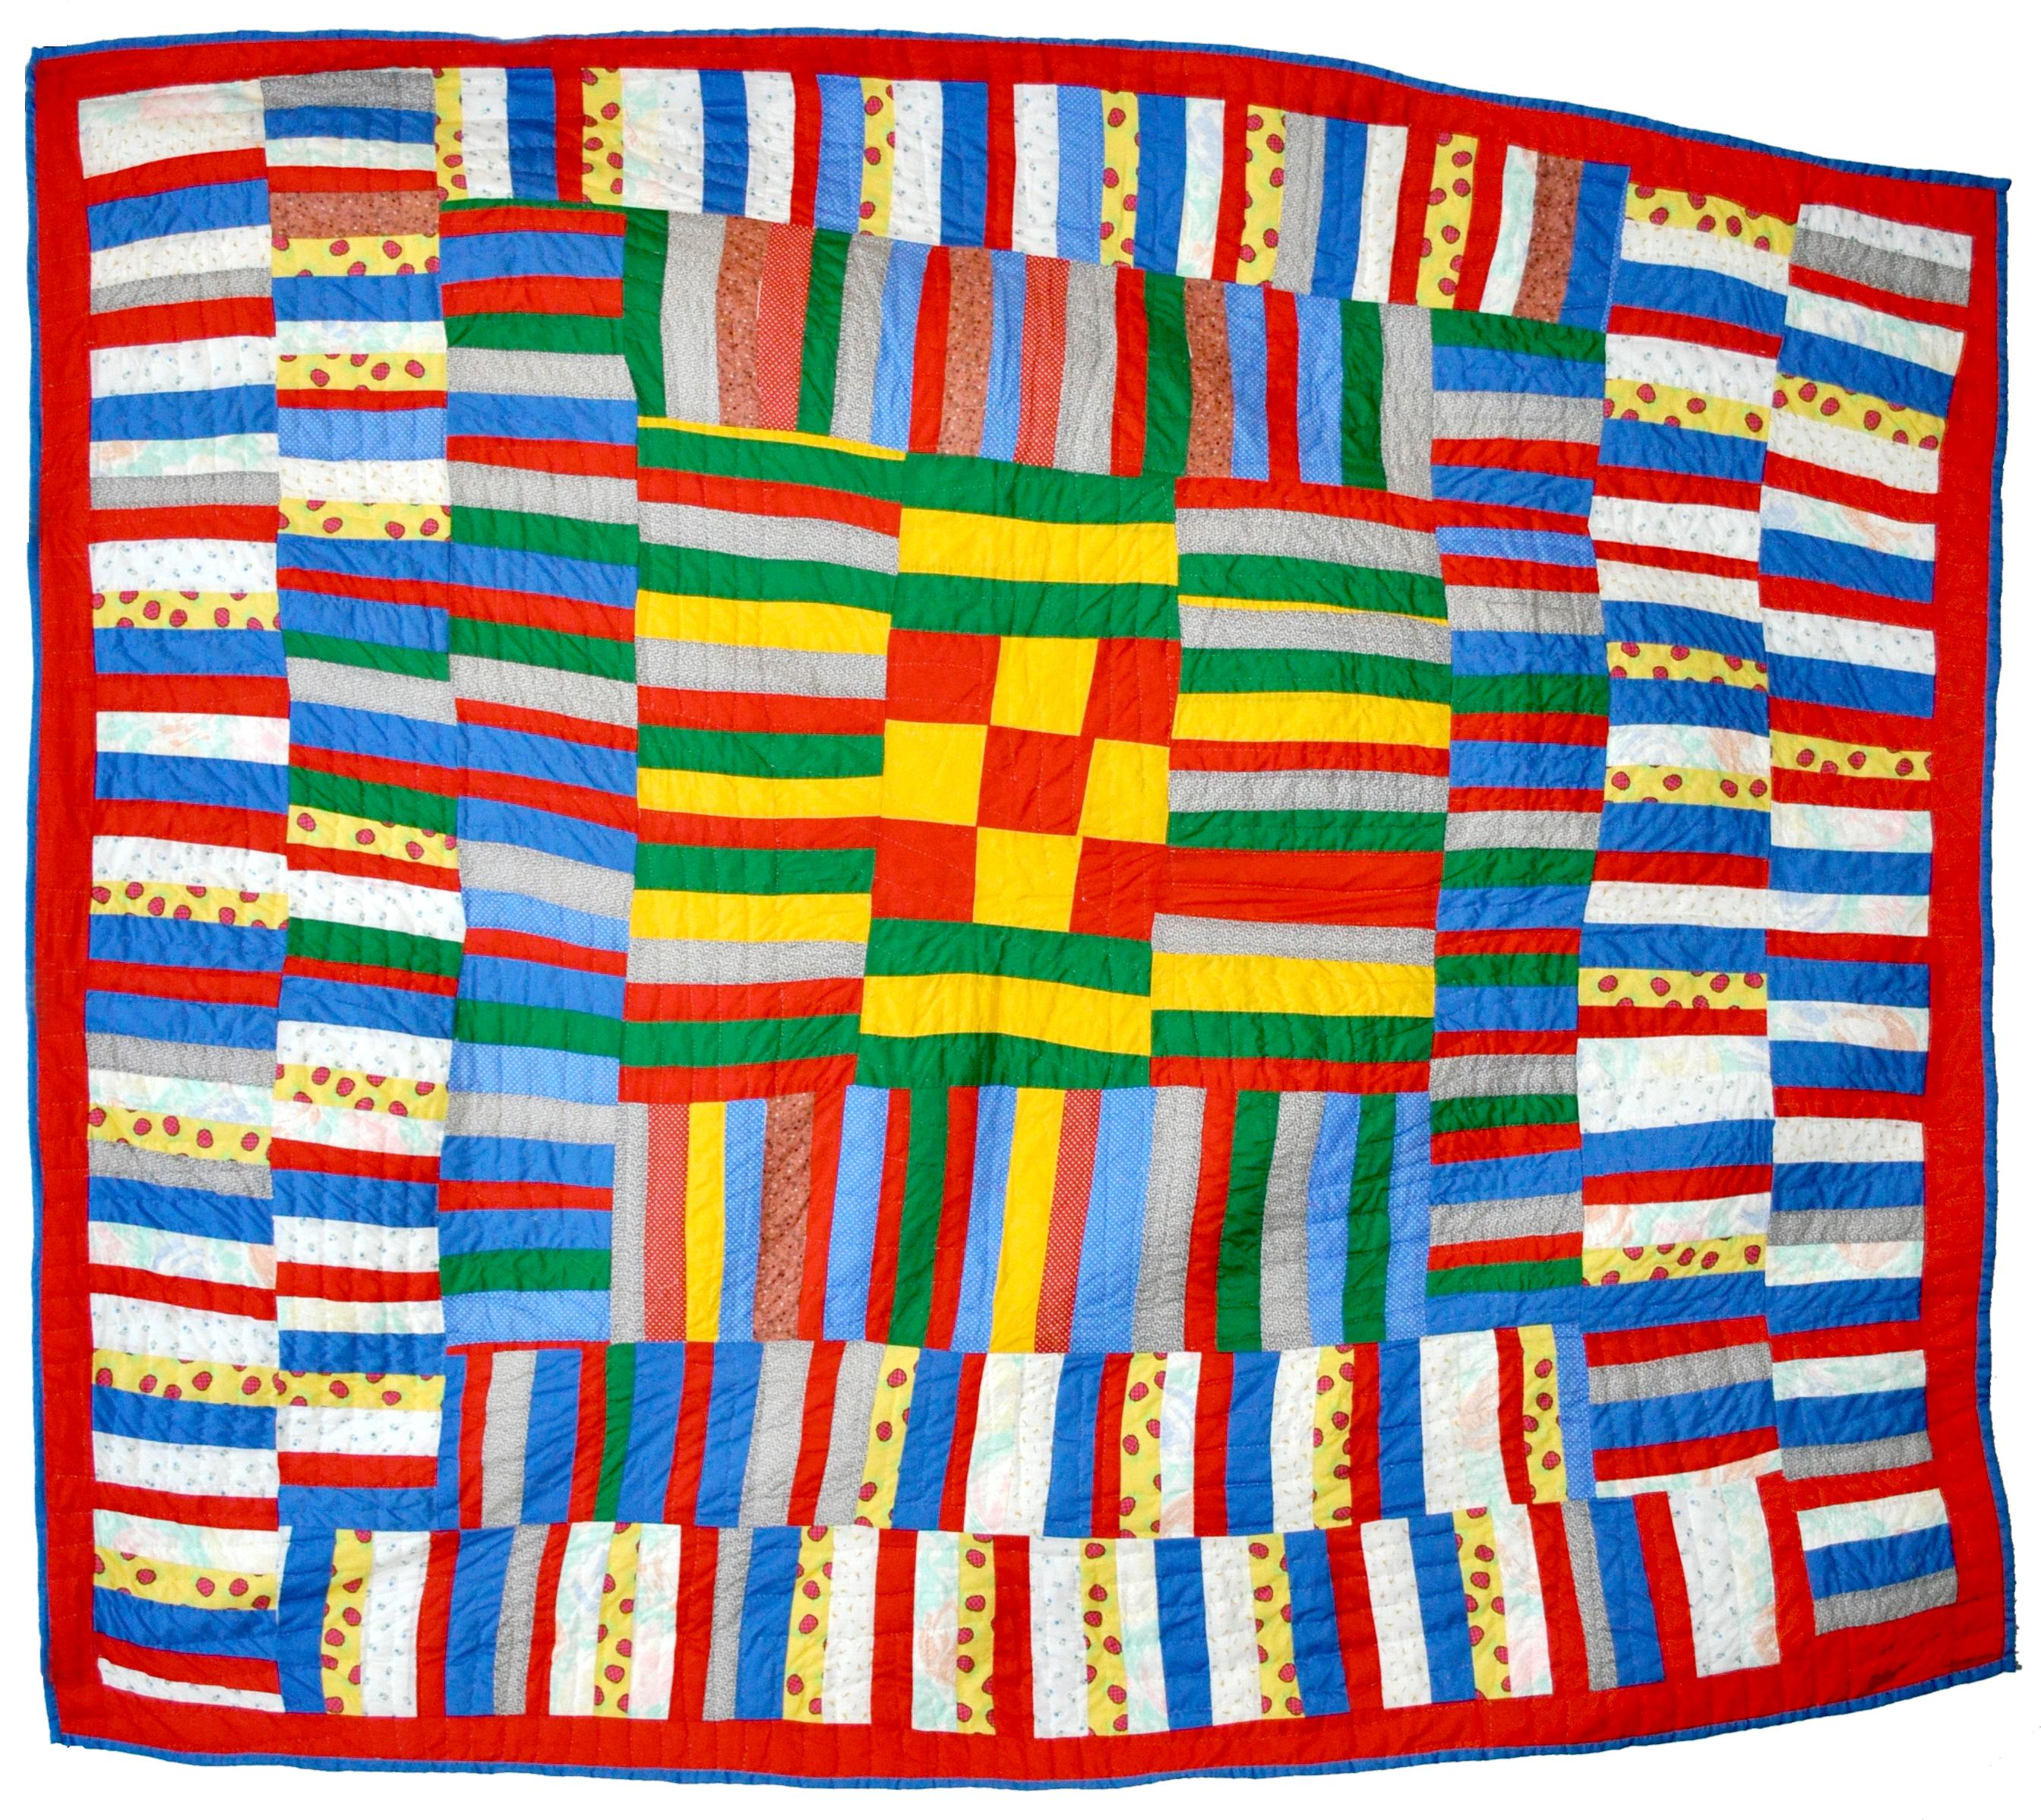 Lucy Mingo, a descendant of several generations of Gee’s Bend quilters, and leading spokeswoman for Gee’s Bend, made this quilt in 1979. We use this photo as an illustration of African-American quilting rather than one of Rosie Lee Tompkins as she did not like to be photographed